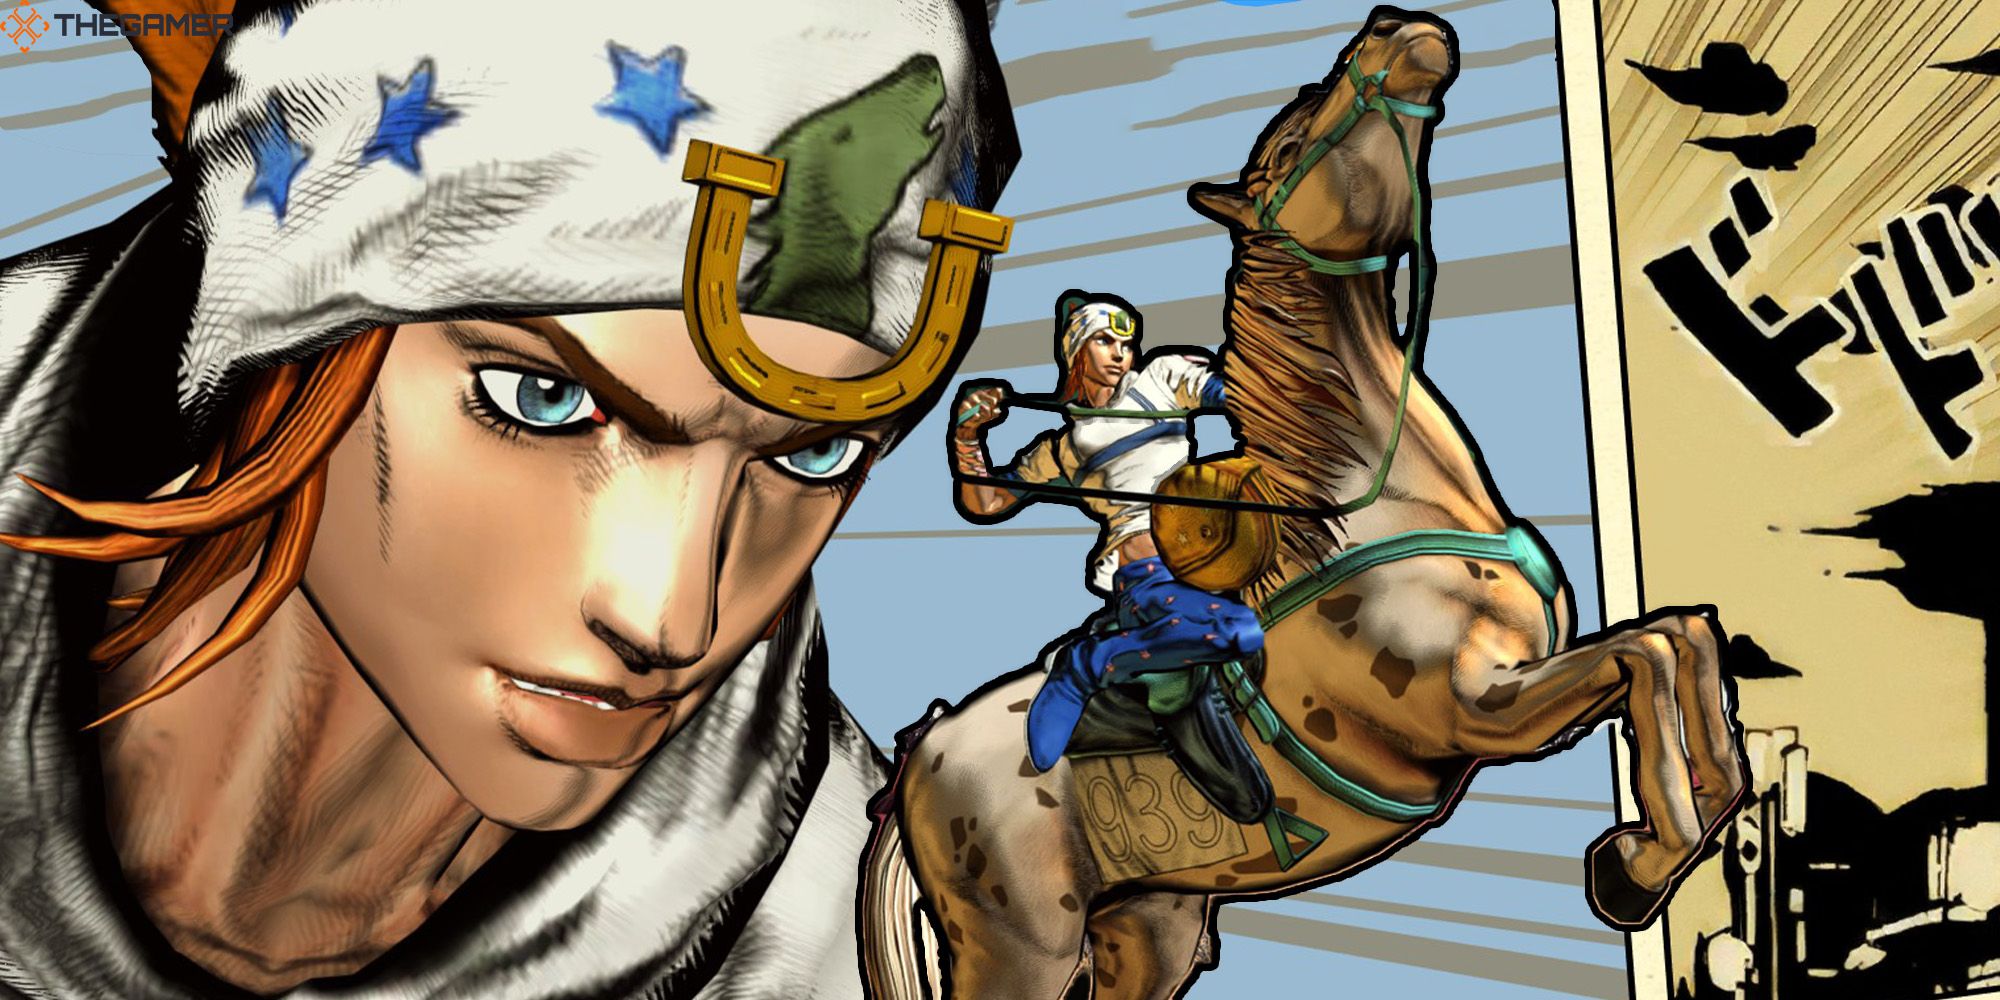 A background image shows Johnny Joestar illustrated inside a manga panel while another image shows Johnny riding his horse in the foreground. Custom image for JoJo's Bizarre Adventure ASBR.